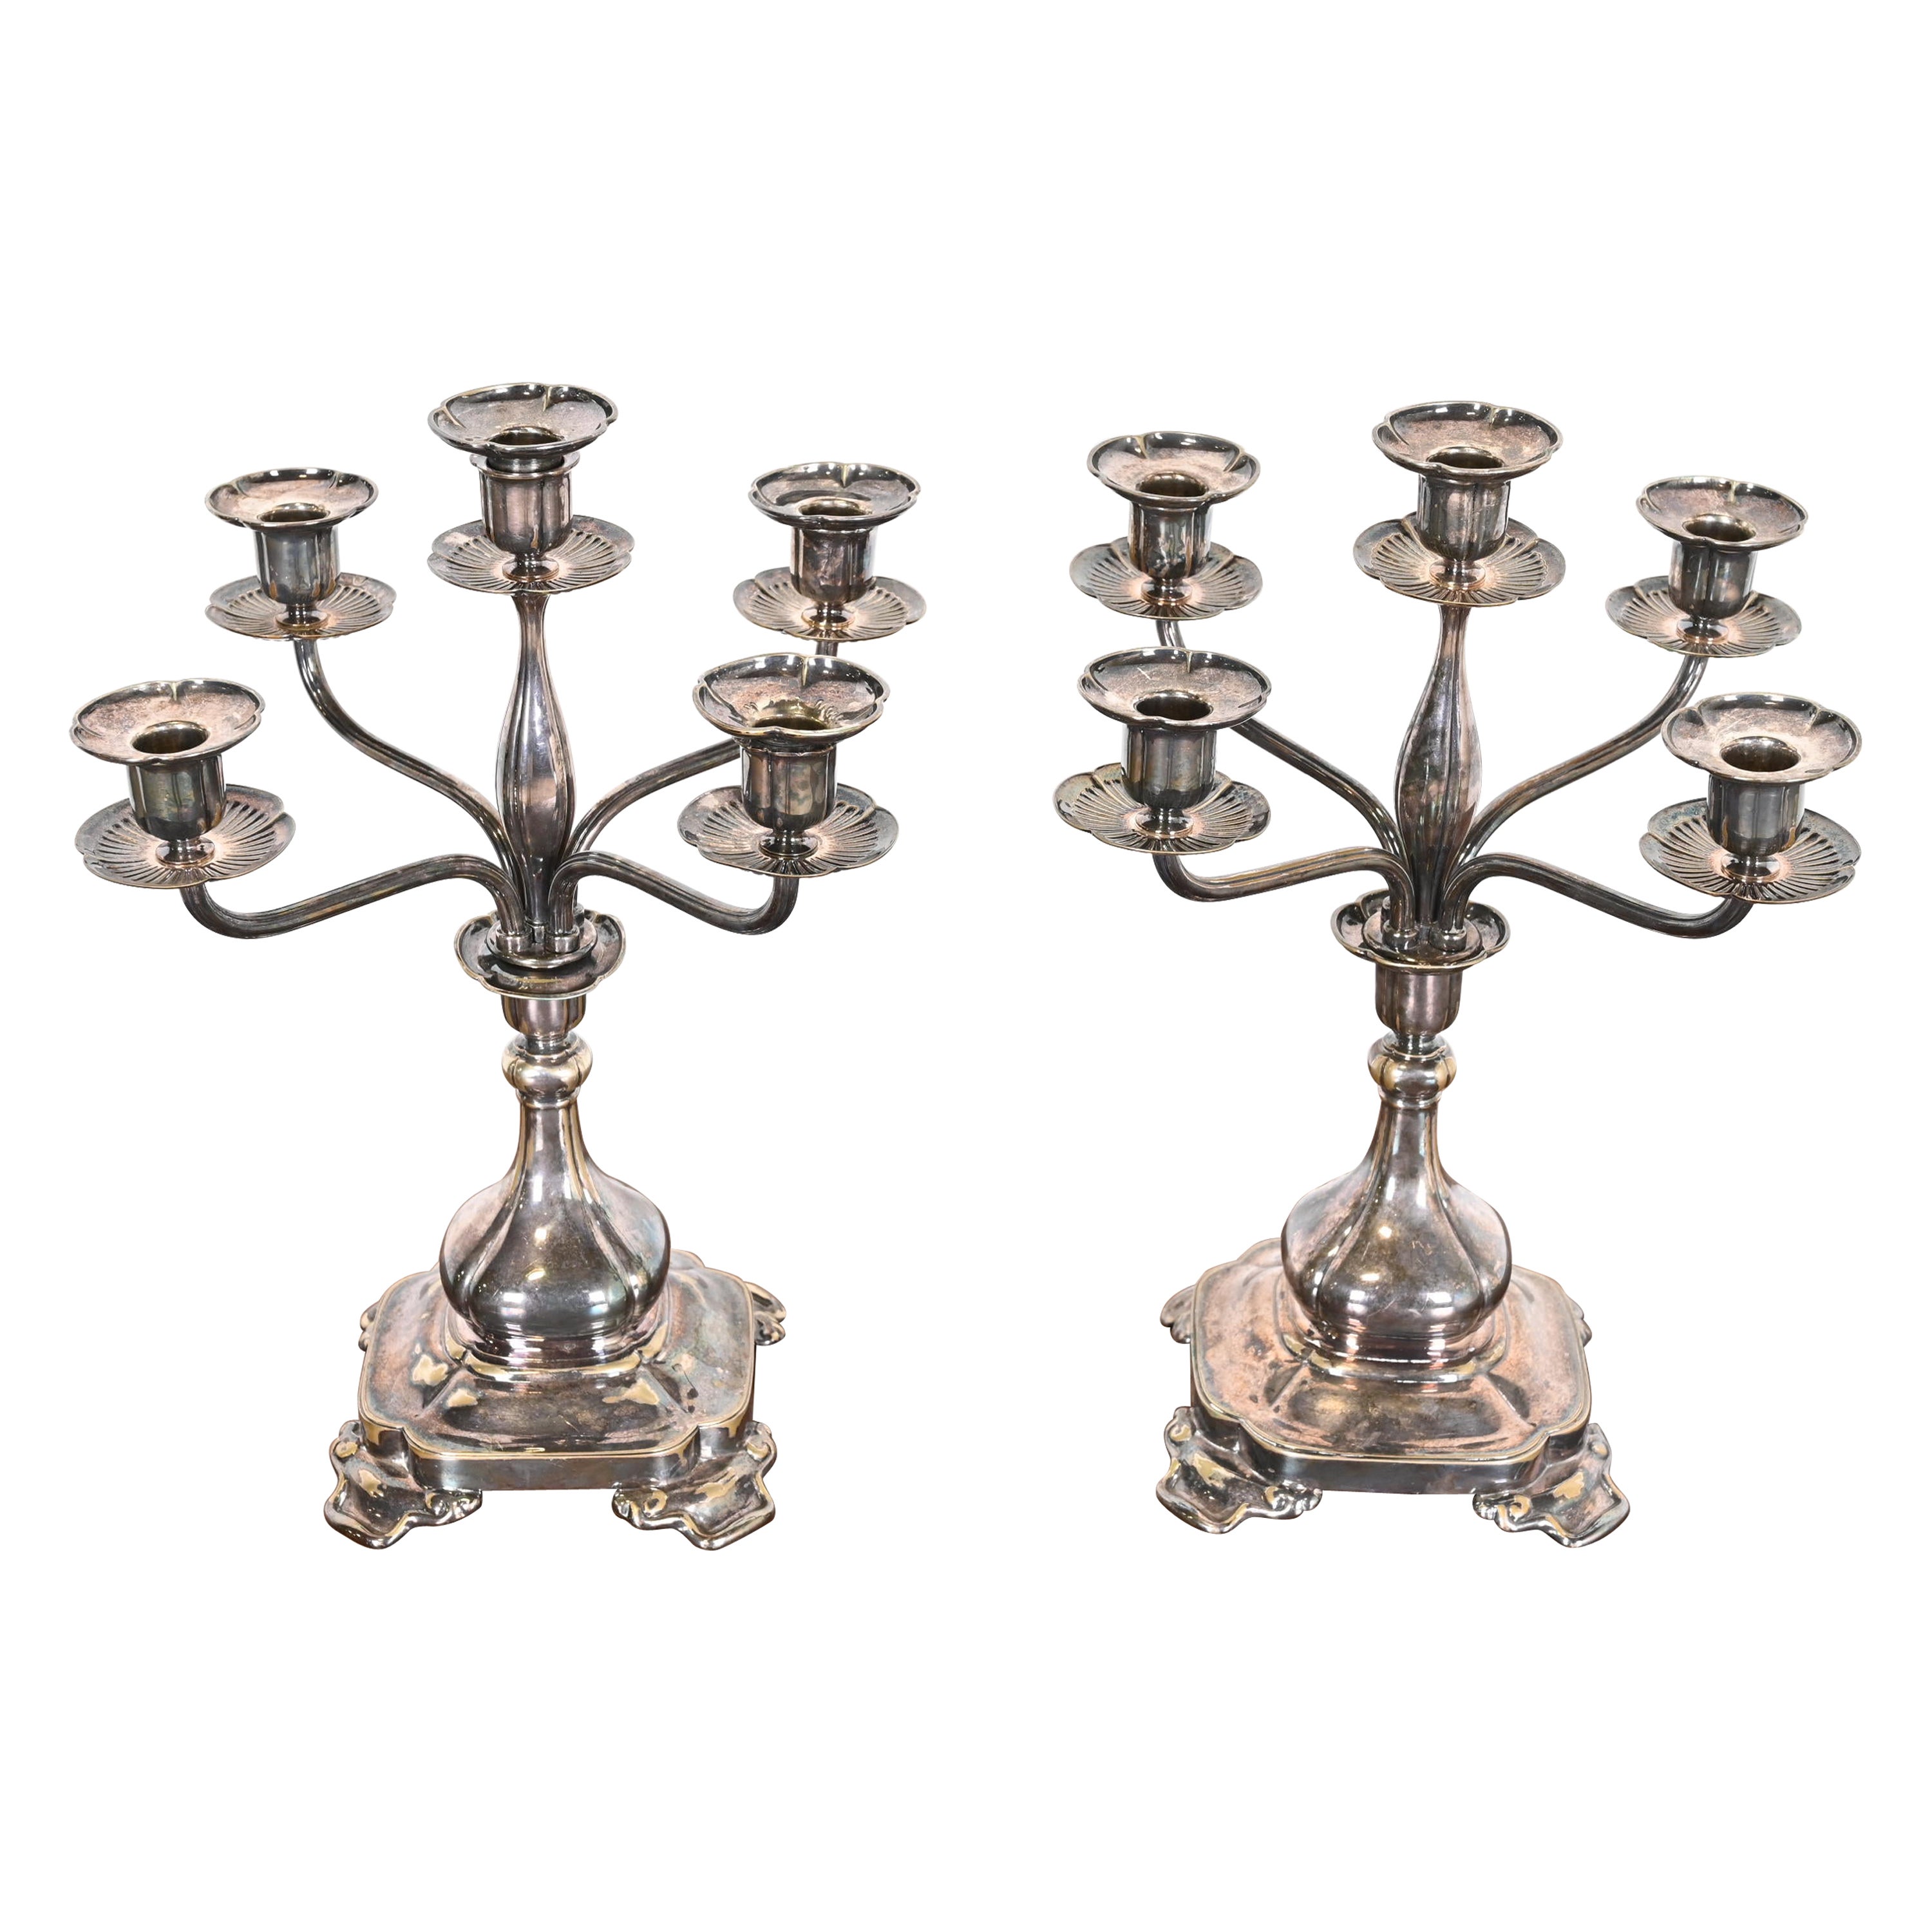 Tiffany & Co. Antique Silver Five-Arm Candelabra, Pair For Sale